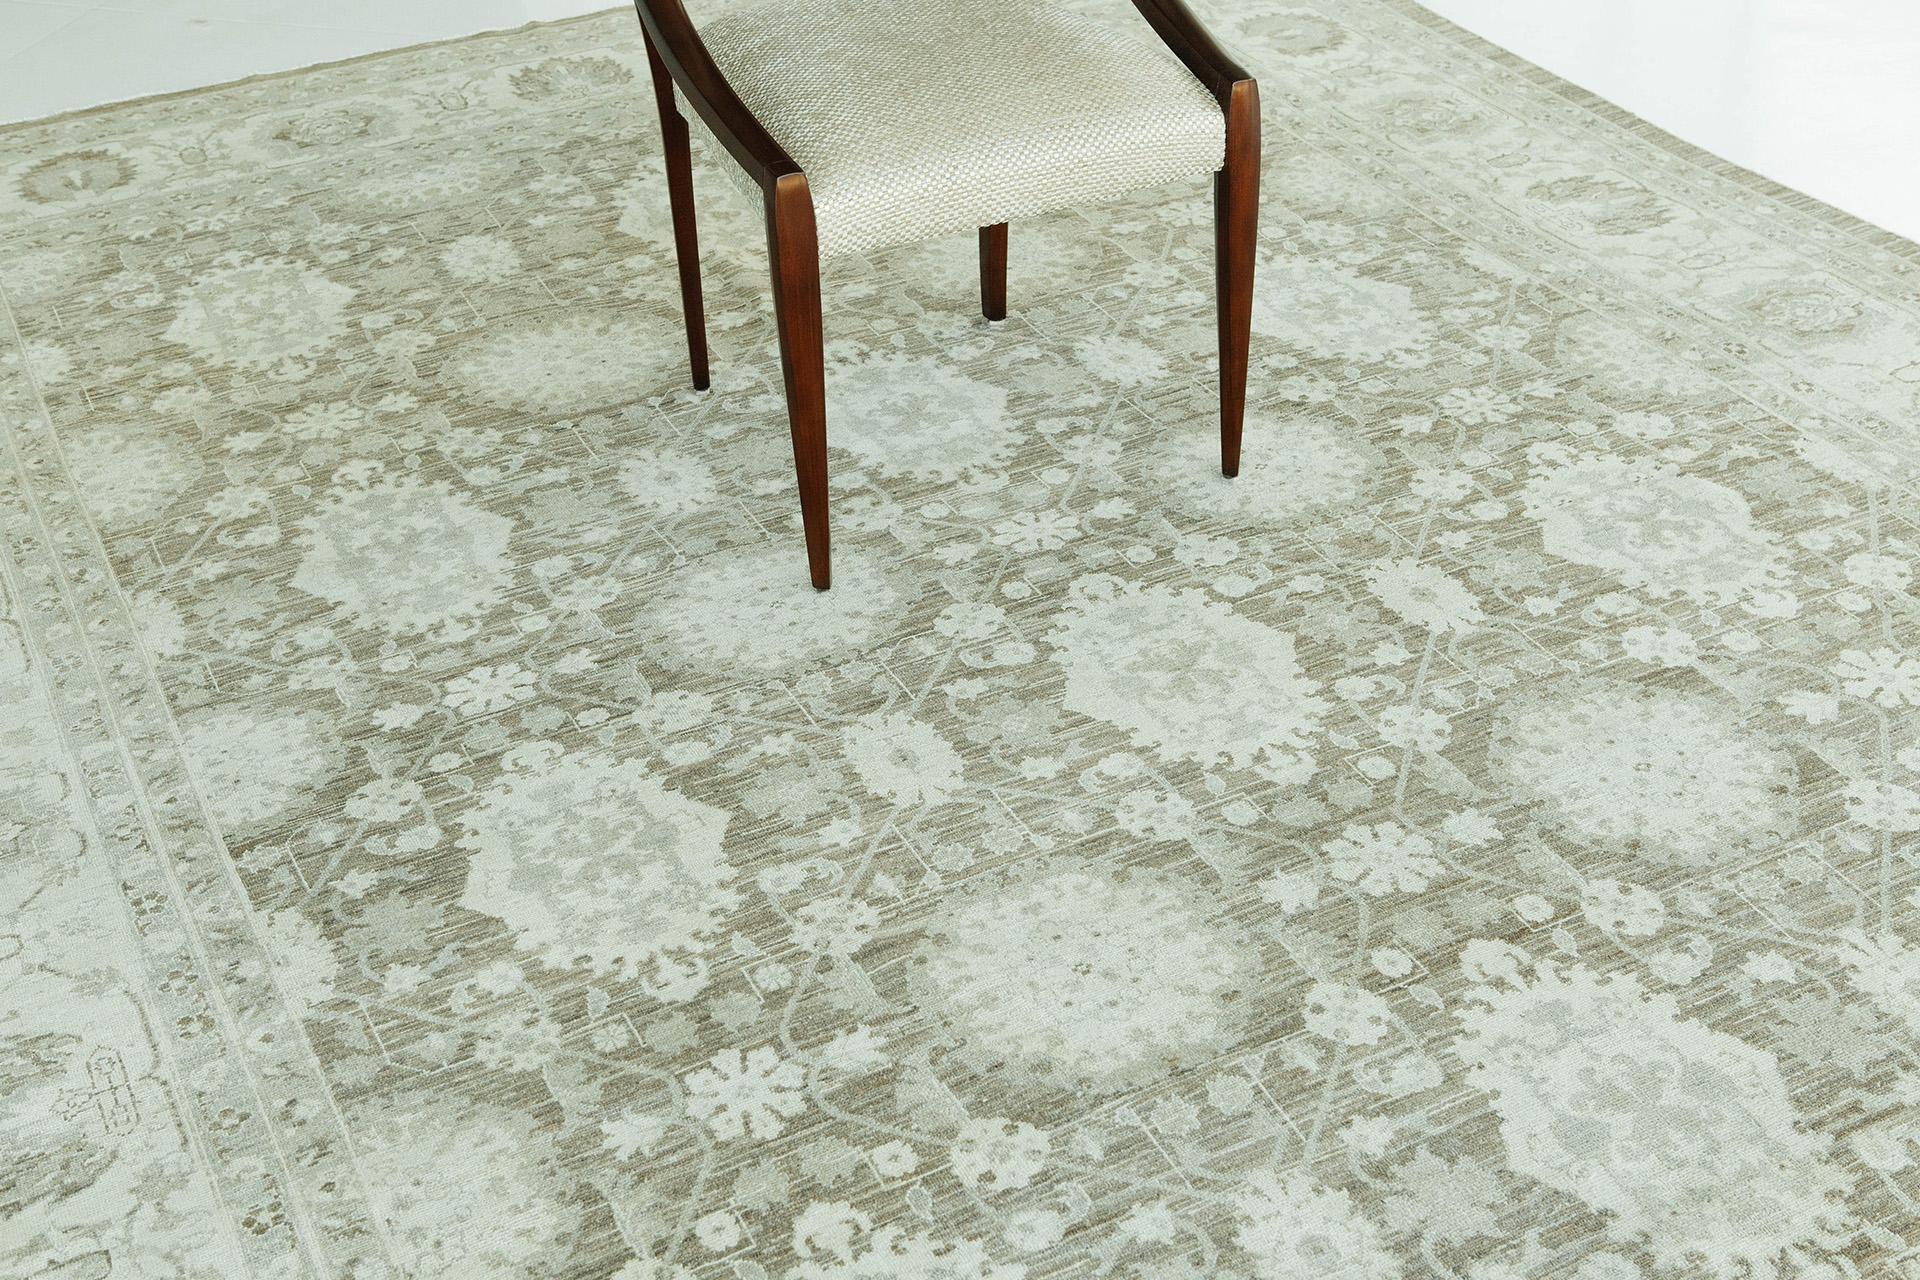 The revival of the classic look in the style of the Mahal rug has an aesthetic appeal due to its unique patterns that really stand out. The fine addition of khaki and dark brown hues to the pile woven rug elevates it to a further sophistication. It